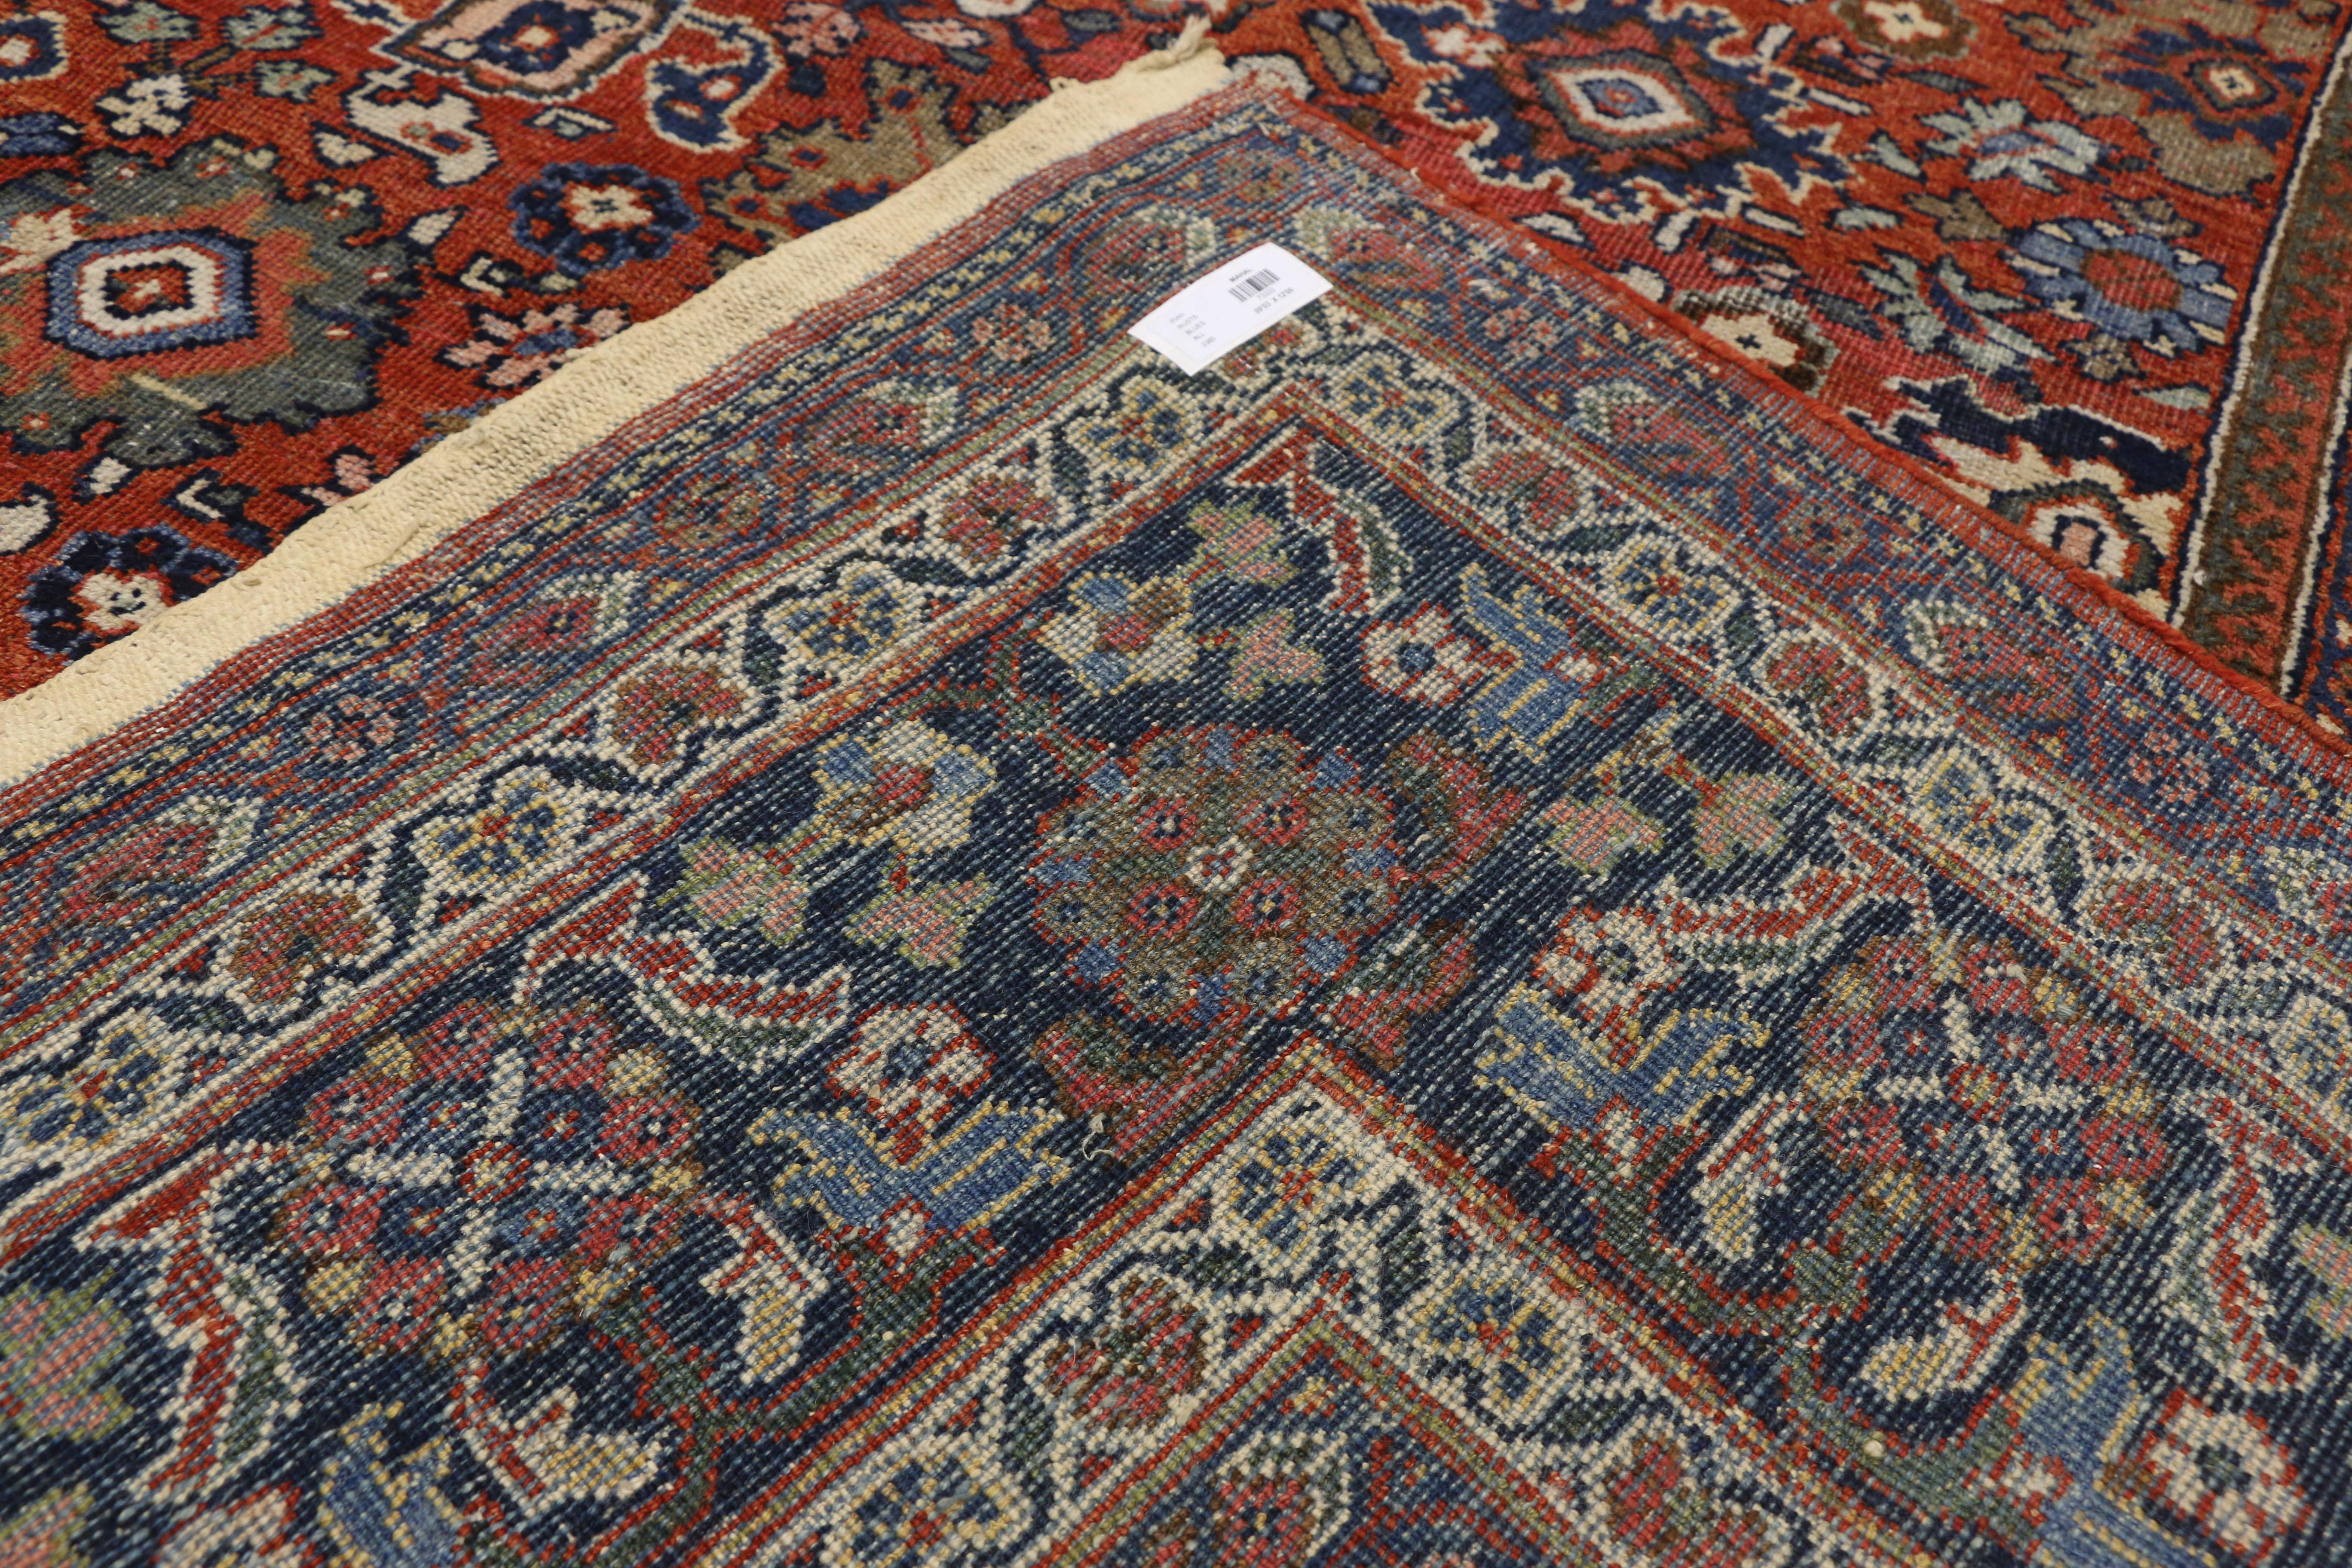 Hand-Knotted Antique Persian Mahal Area Rug with Federal and American Colonial Style